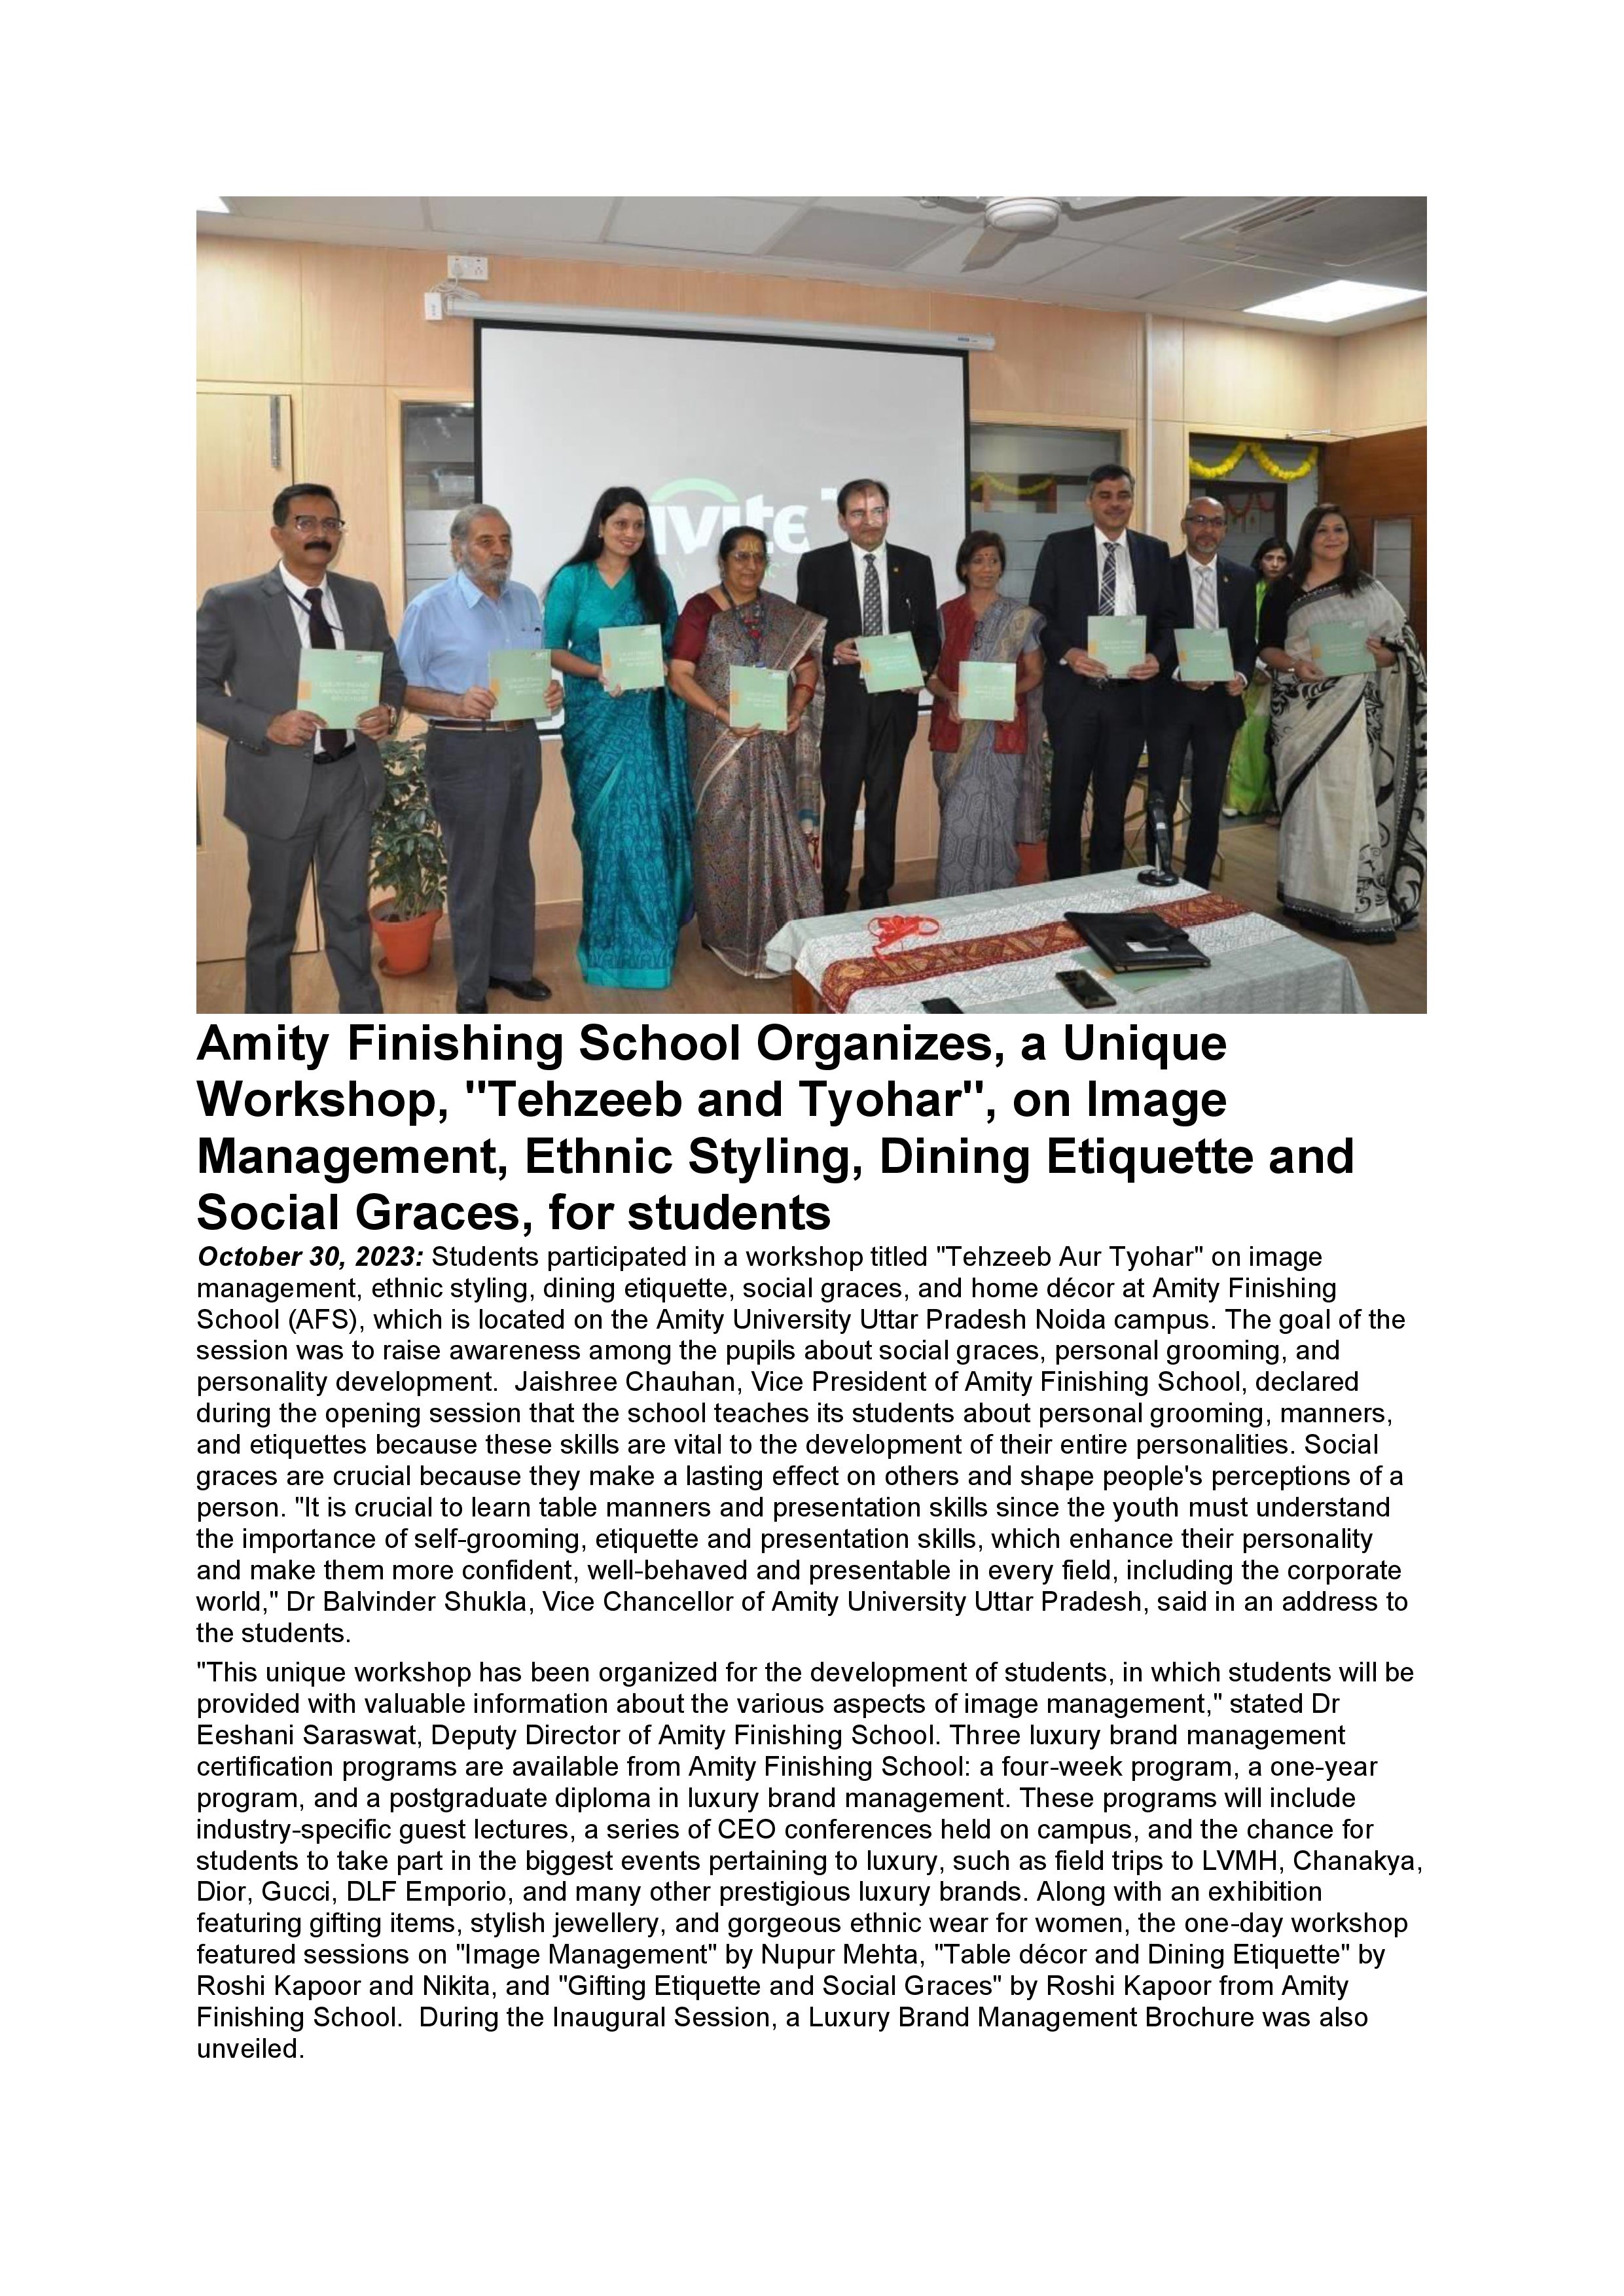 Amity Finishing School organizes a workshop titled, Tehzeeb and Tyohar for students